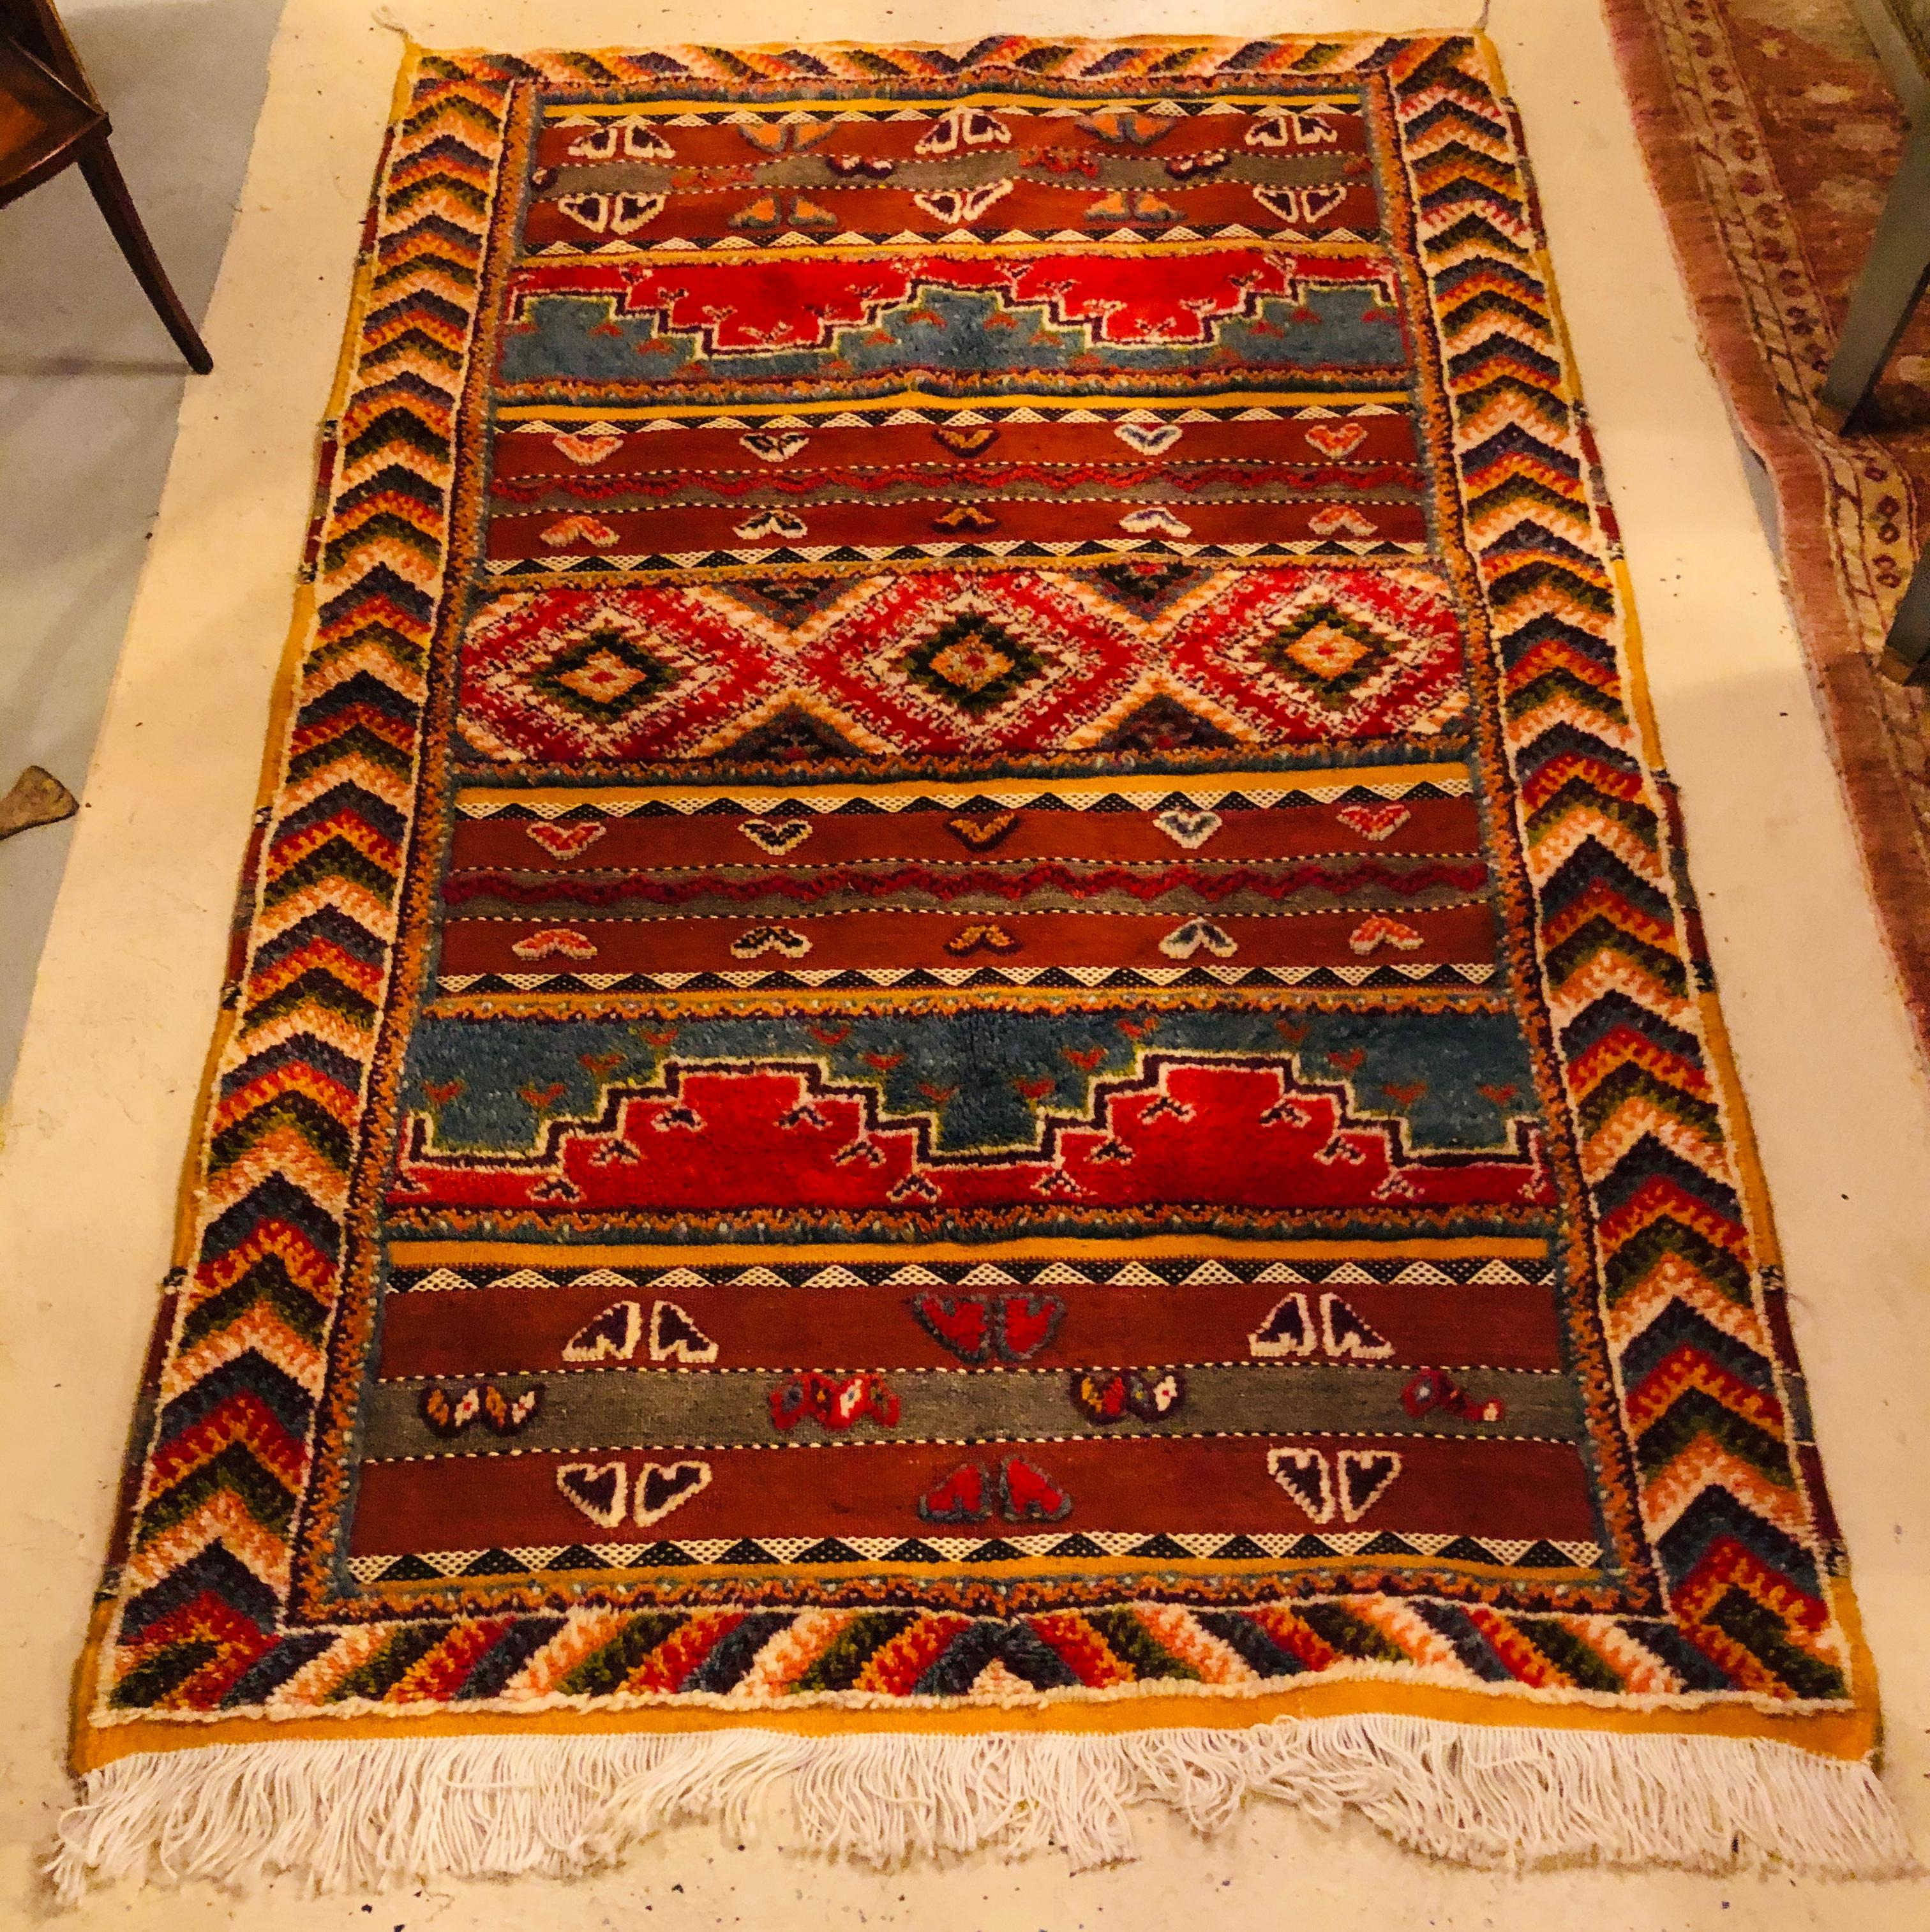 A beautiful and one of a kind vintage tribal rug in earthy tone colors and tribal motifs and designs reflecting over a thousand year culture. The rug handwoven by tribal women in the Atlas mountains features central diamond pattern with complex and